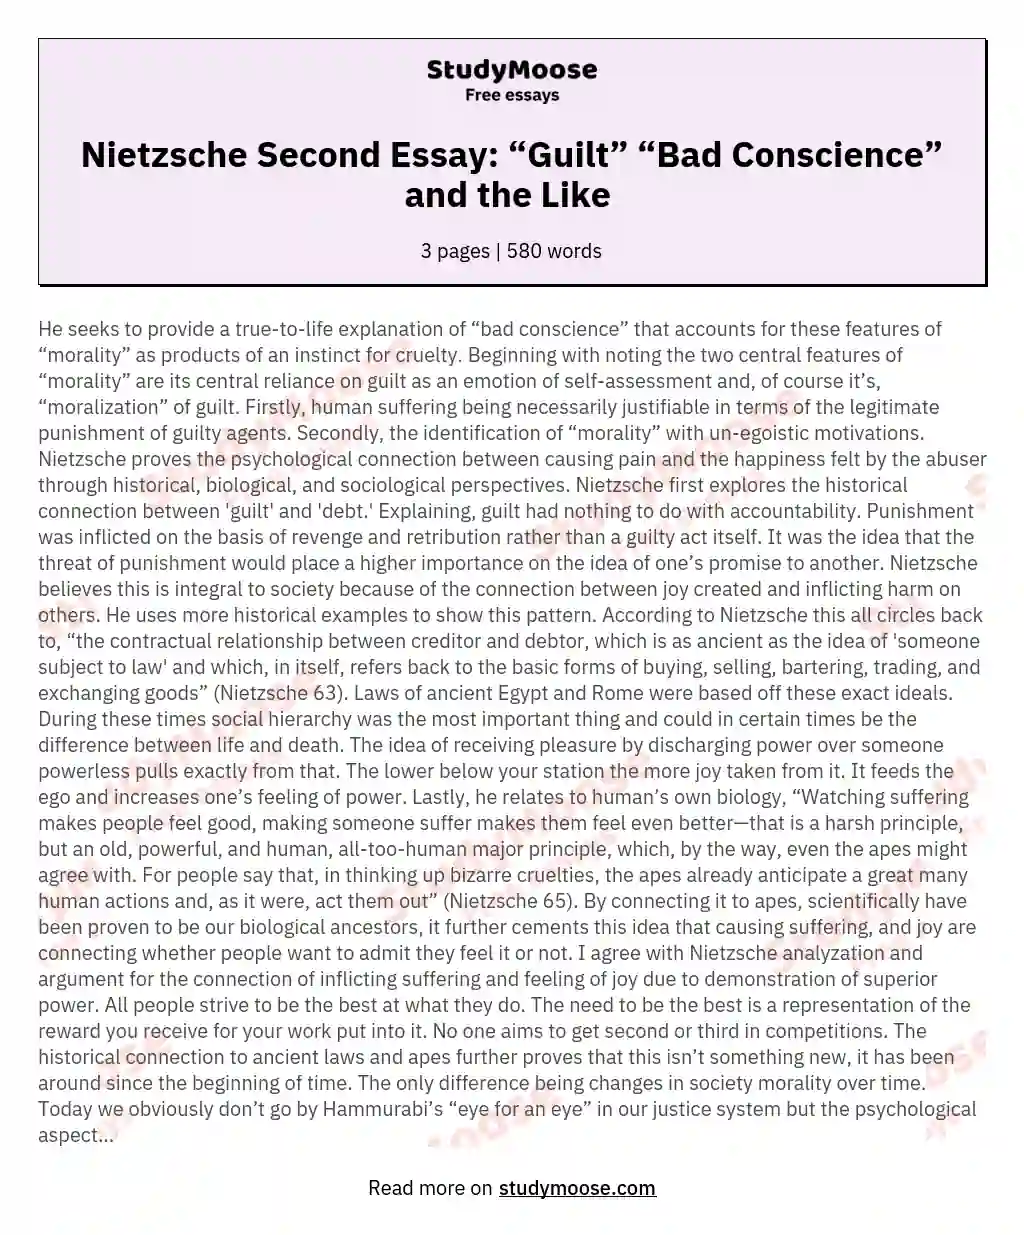 Nietzsche Second Essay: “Guilt” “Bad Conscience” and the Like  essay